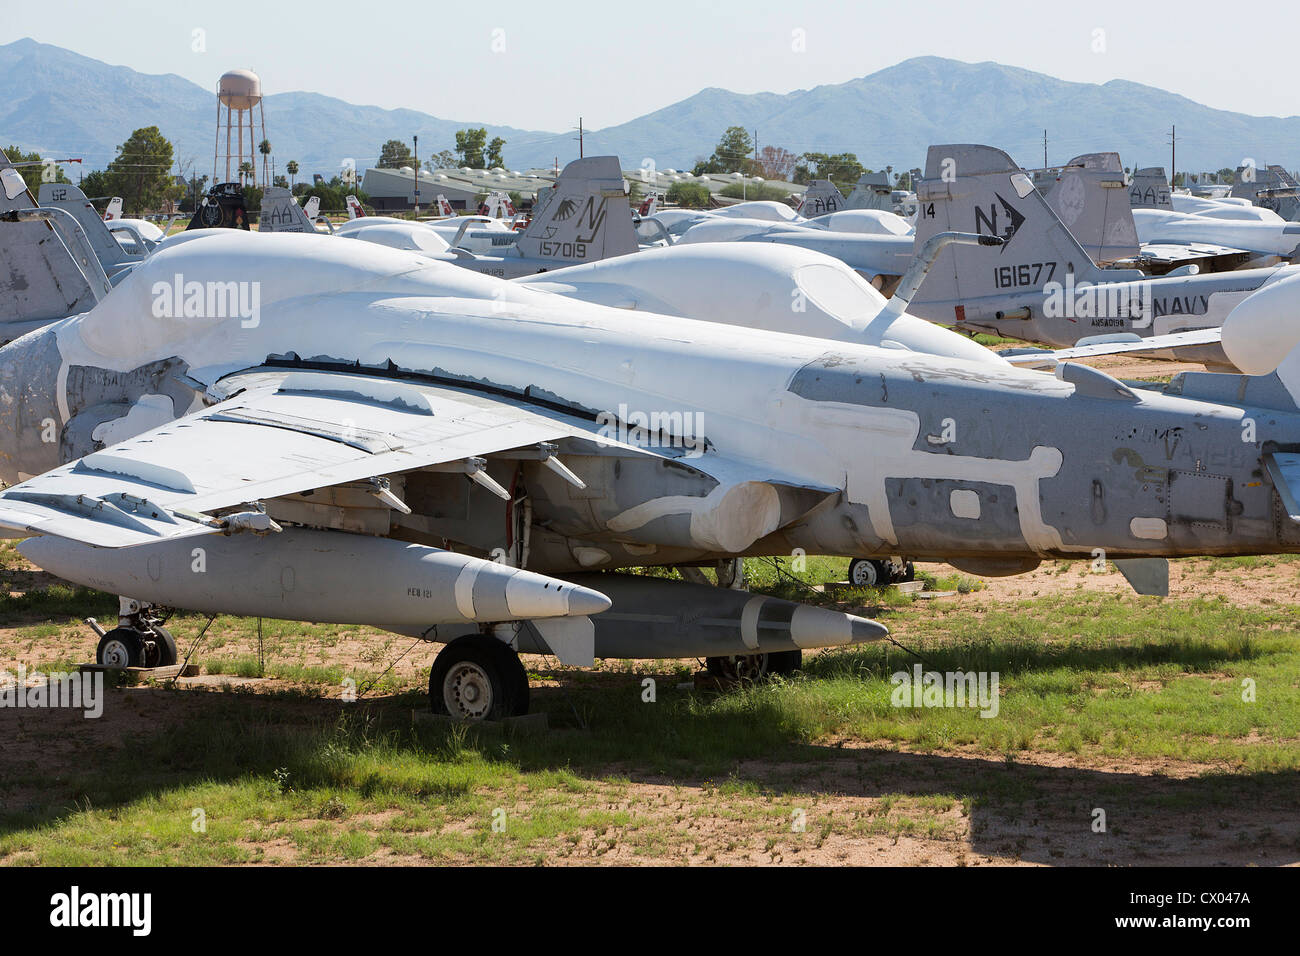 A-6 Eindringling Flugzeuge in der Lagerung bei der 309. Aerospace Maintenance and Regeneration Group in Davis-Monthan Air Force Base. Stockfoto